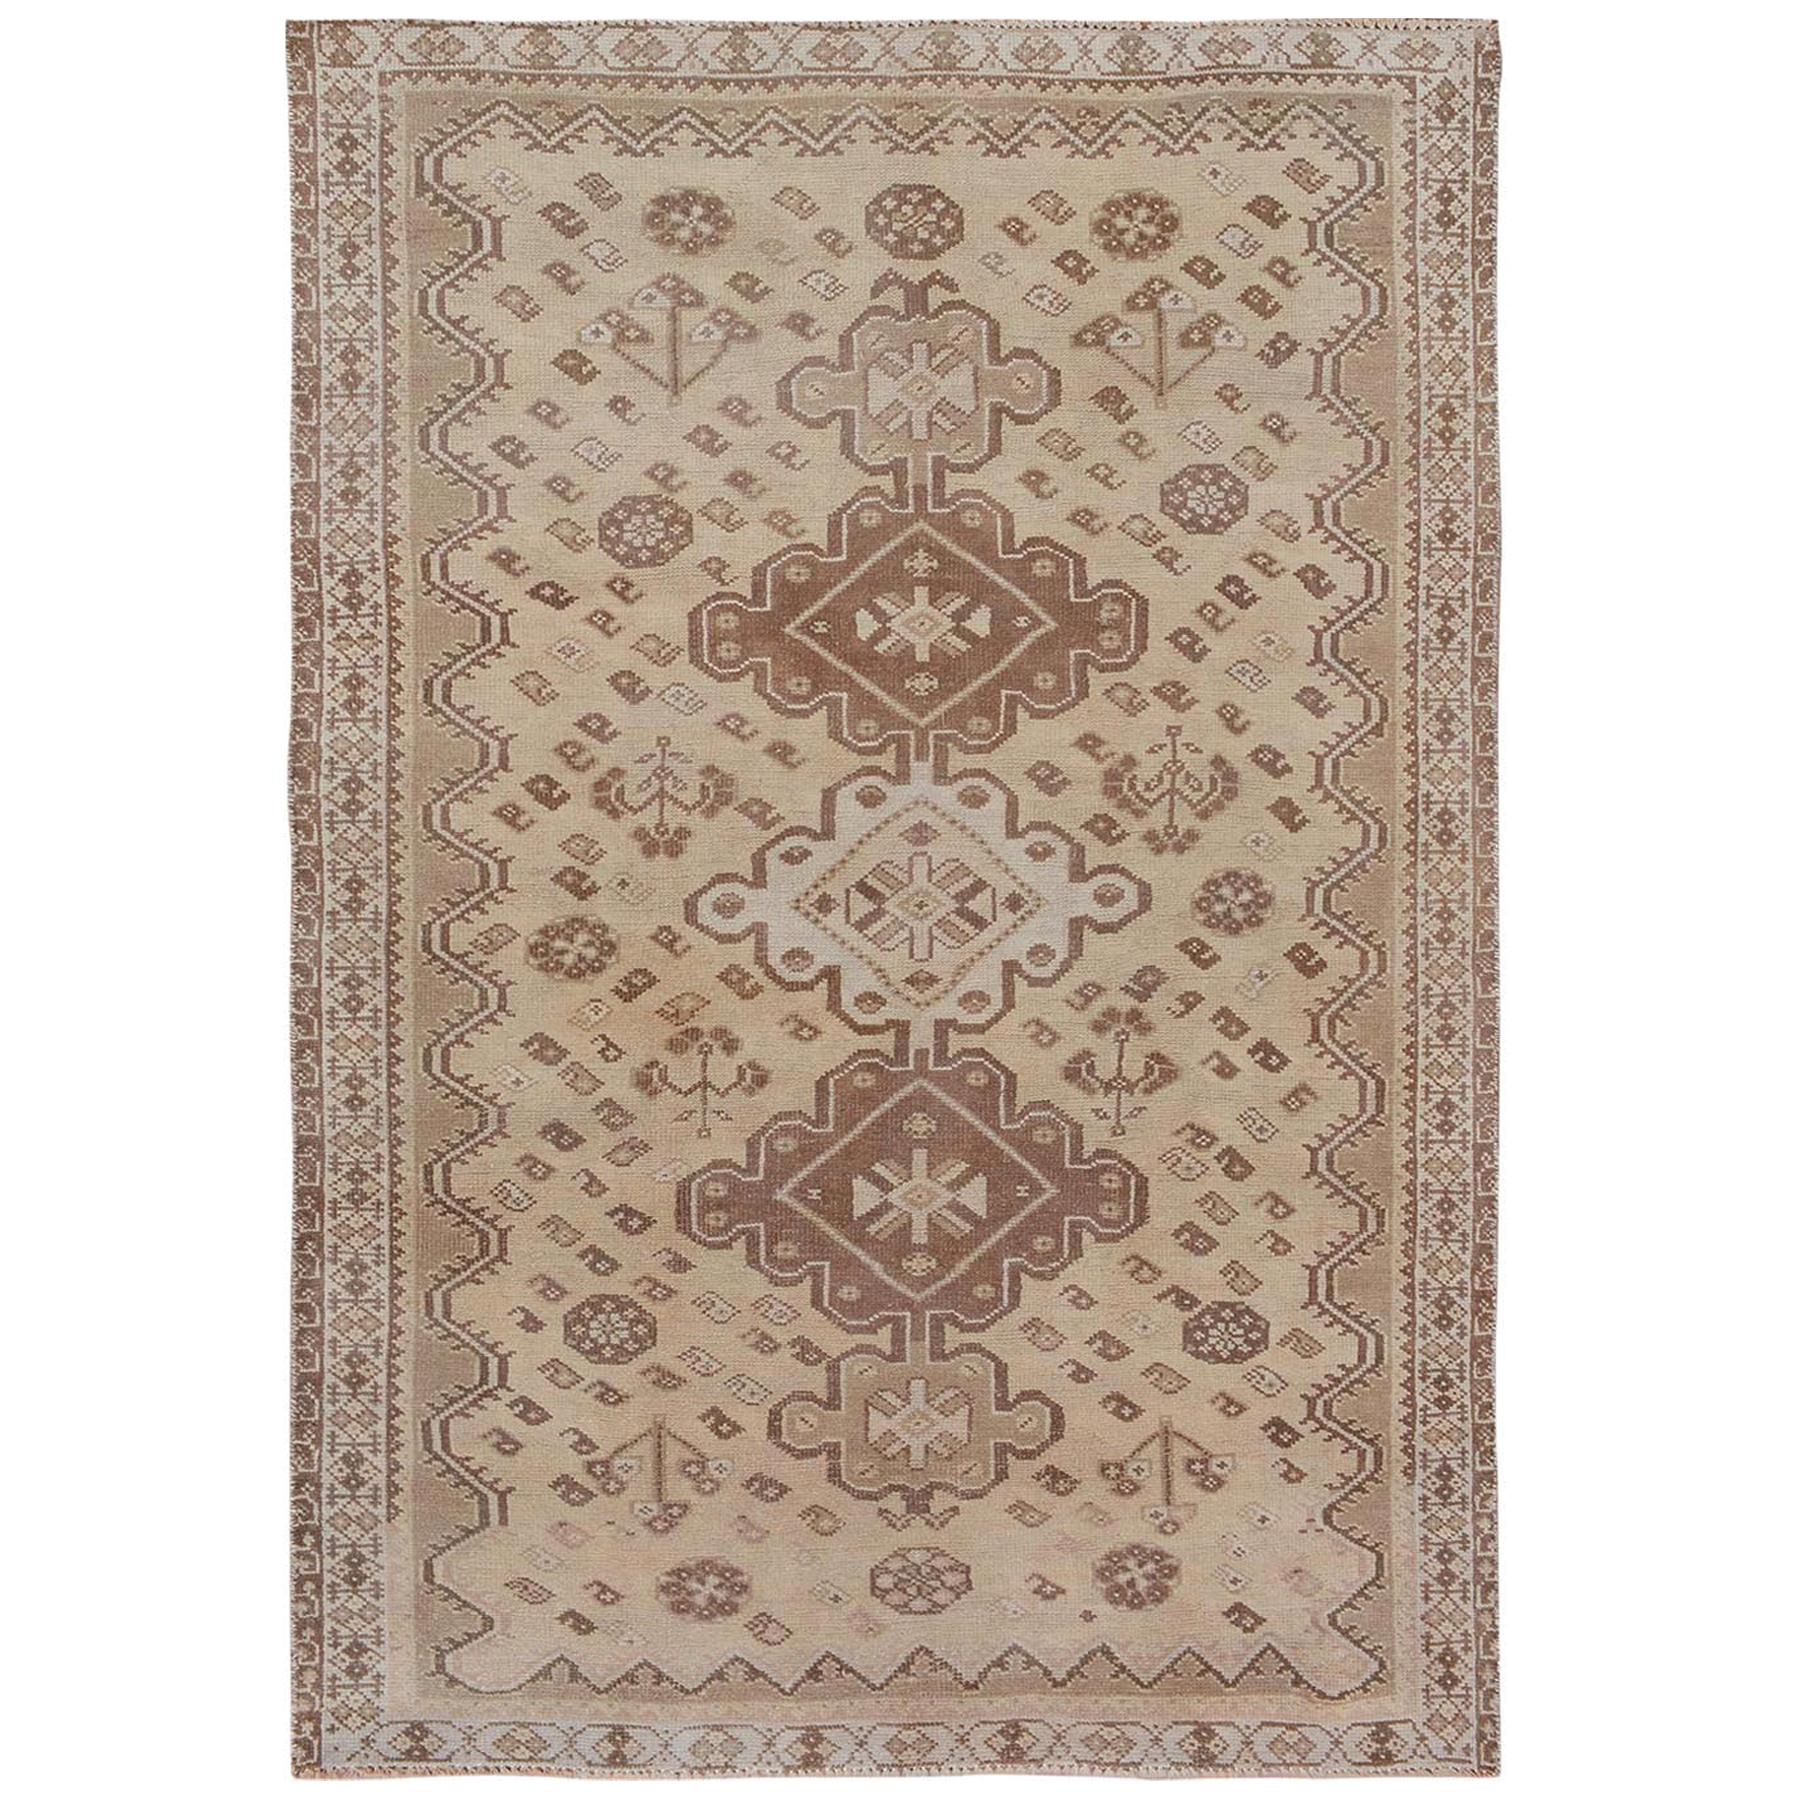 Earth Tones Vintage and Worn Down Persian Shiraz Clean Pure Wool Handknotted Rug